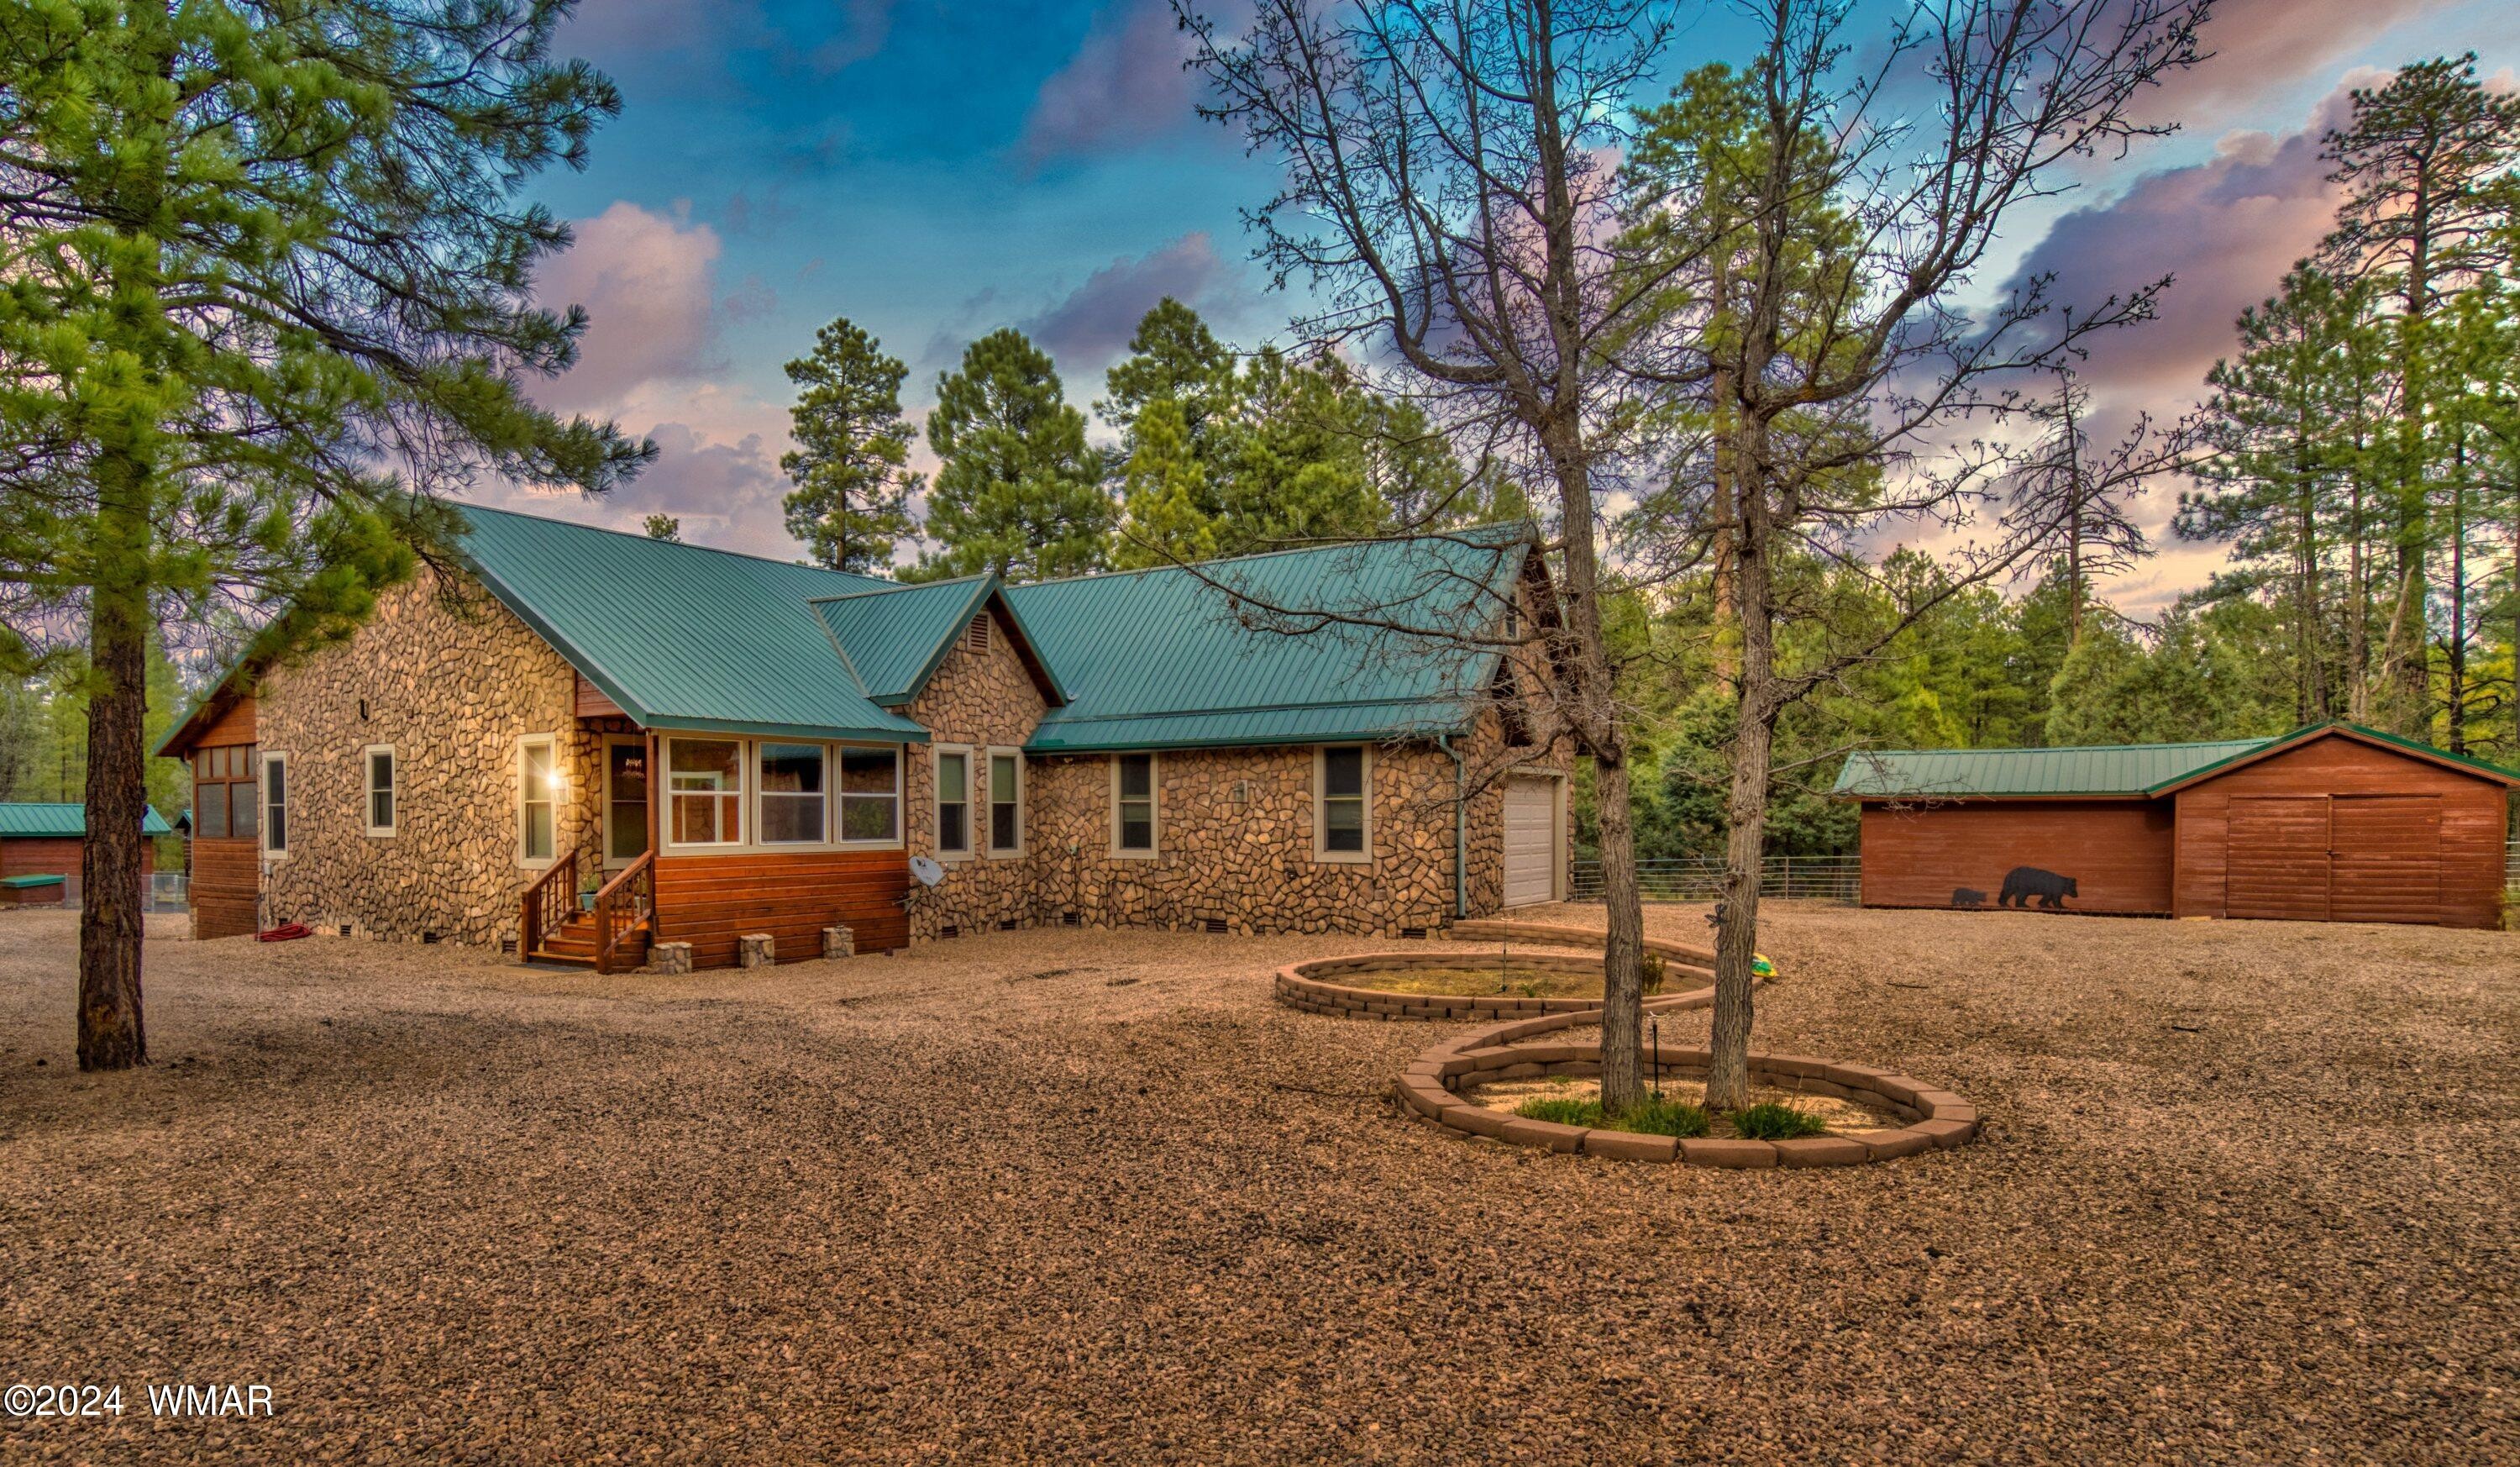 Lakeside, Arizona, 85929, United States, 4 Bedrooms Bedrooms, ,4 BathroomsBathrooms,Residential,For Sale,1488968